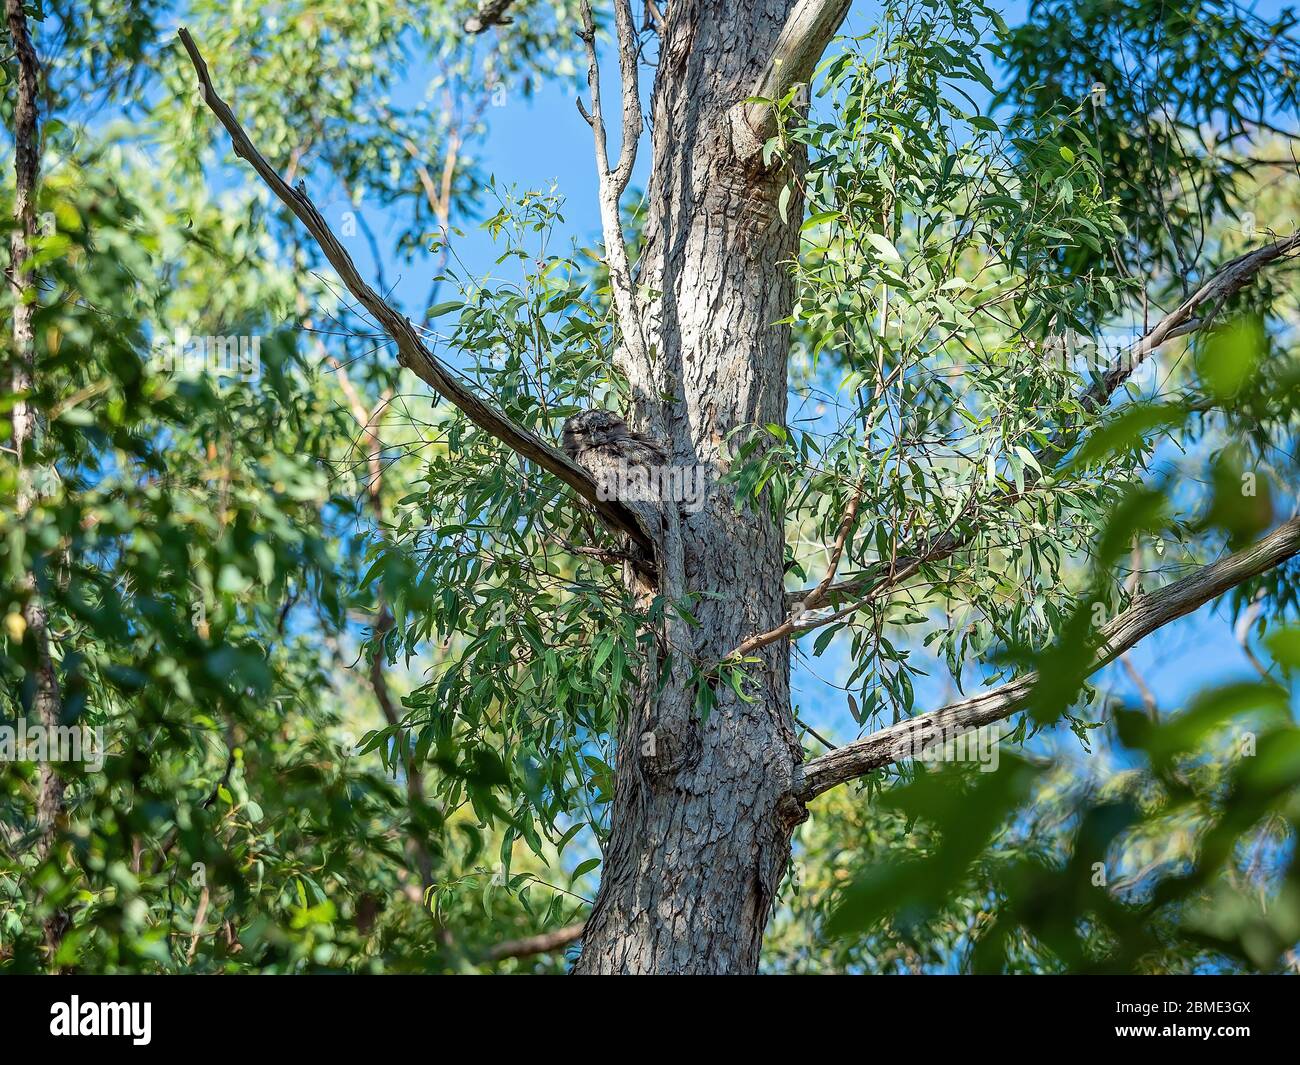 A tawny frogmouth owl camouflaged amongst the tree branches in a forest Stock Photo